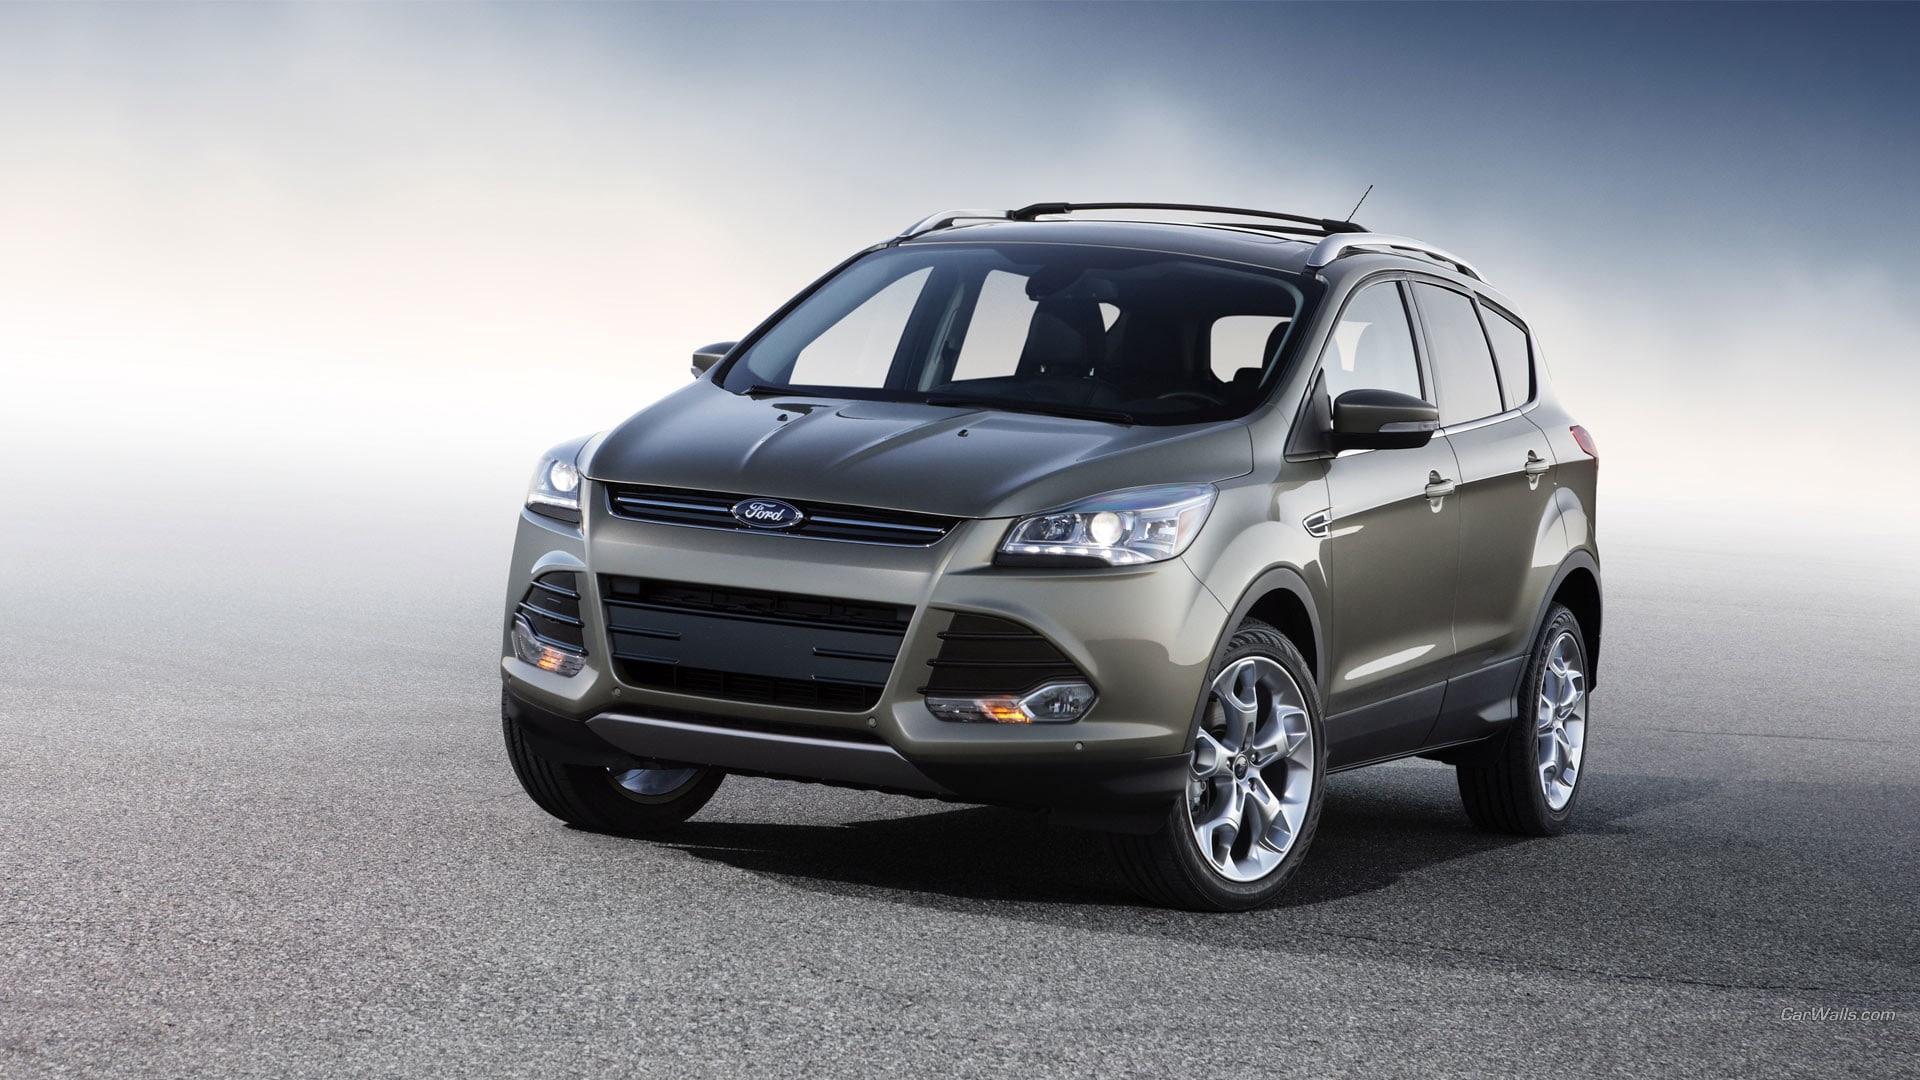 Ford Escape, front angle view